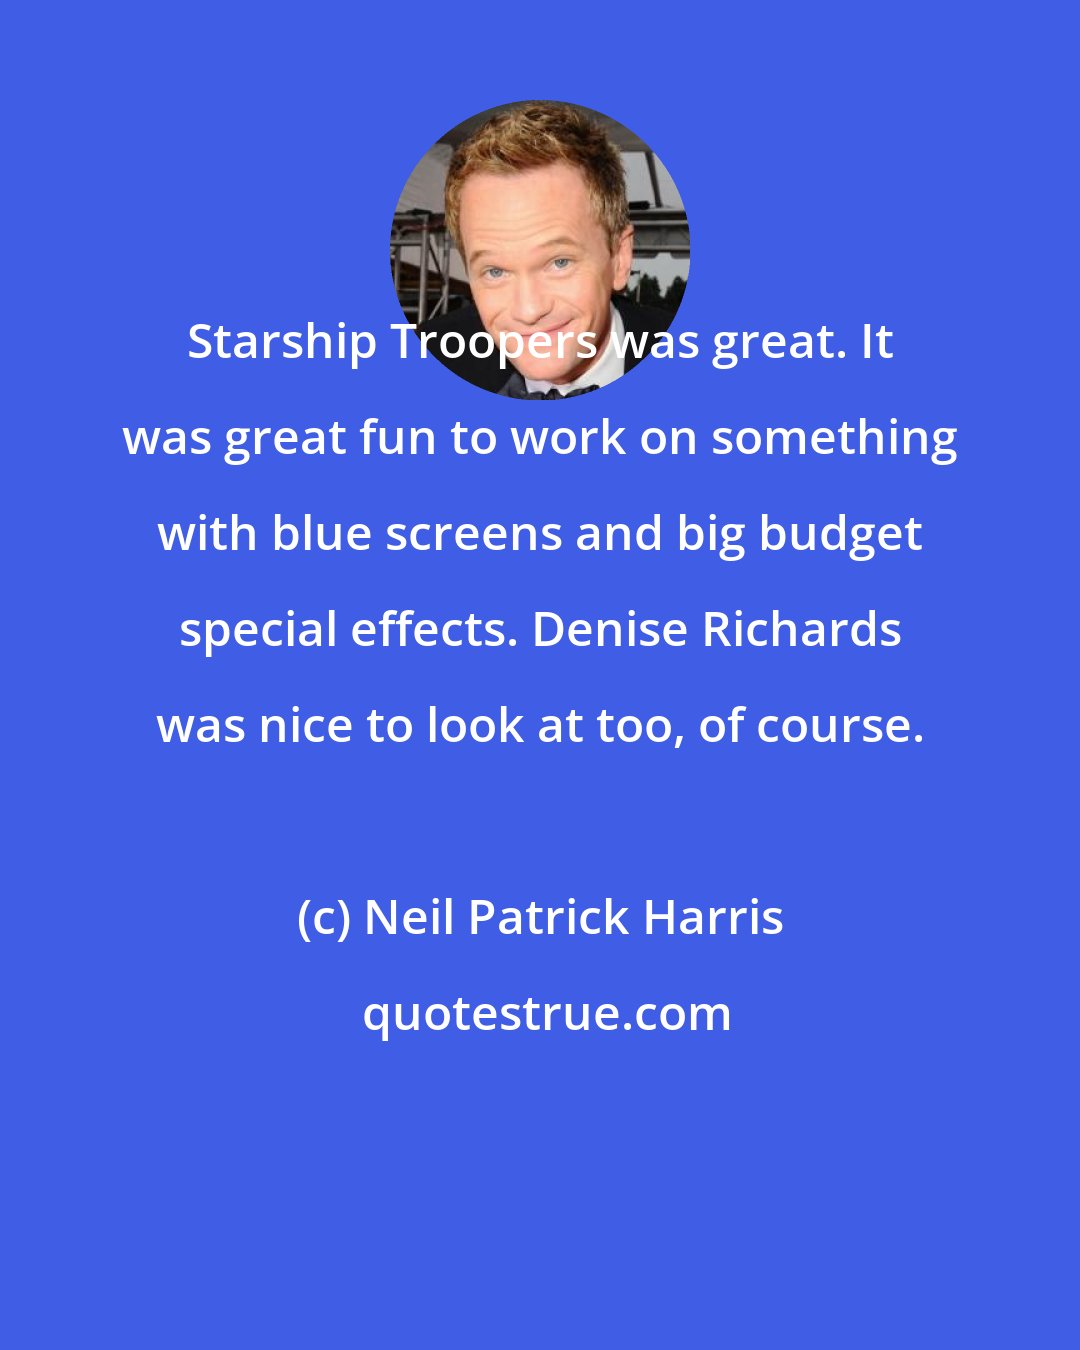 Neil Patrick Harris: Starship Troopers was great. It was great fun to work on something with blue screens and big budget special effects. Denise Richards was nice to look at too, of course.